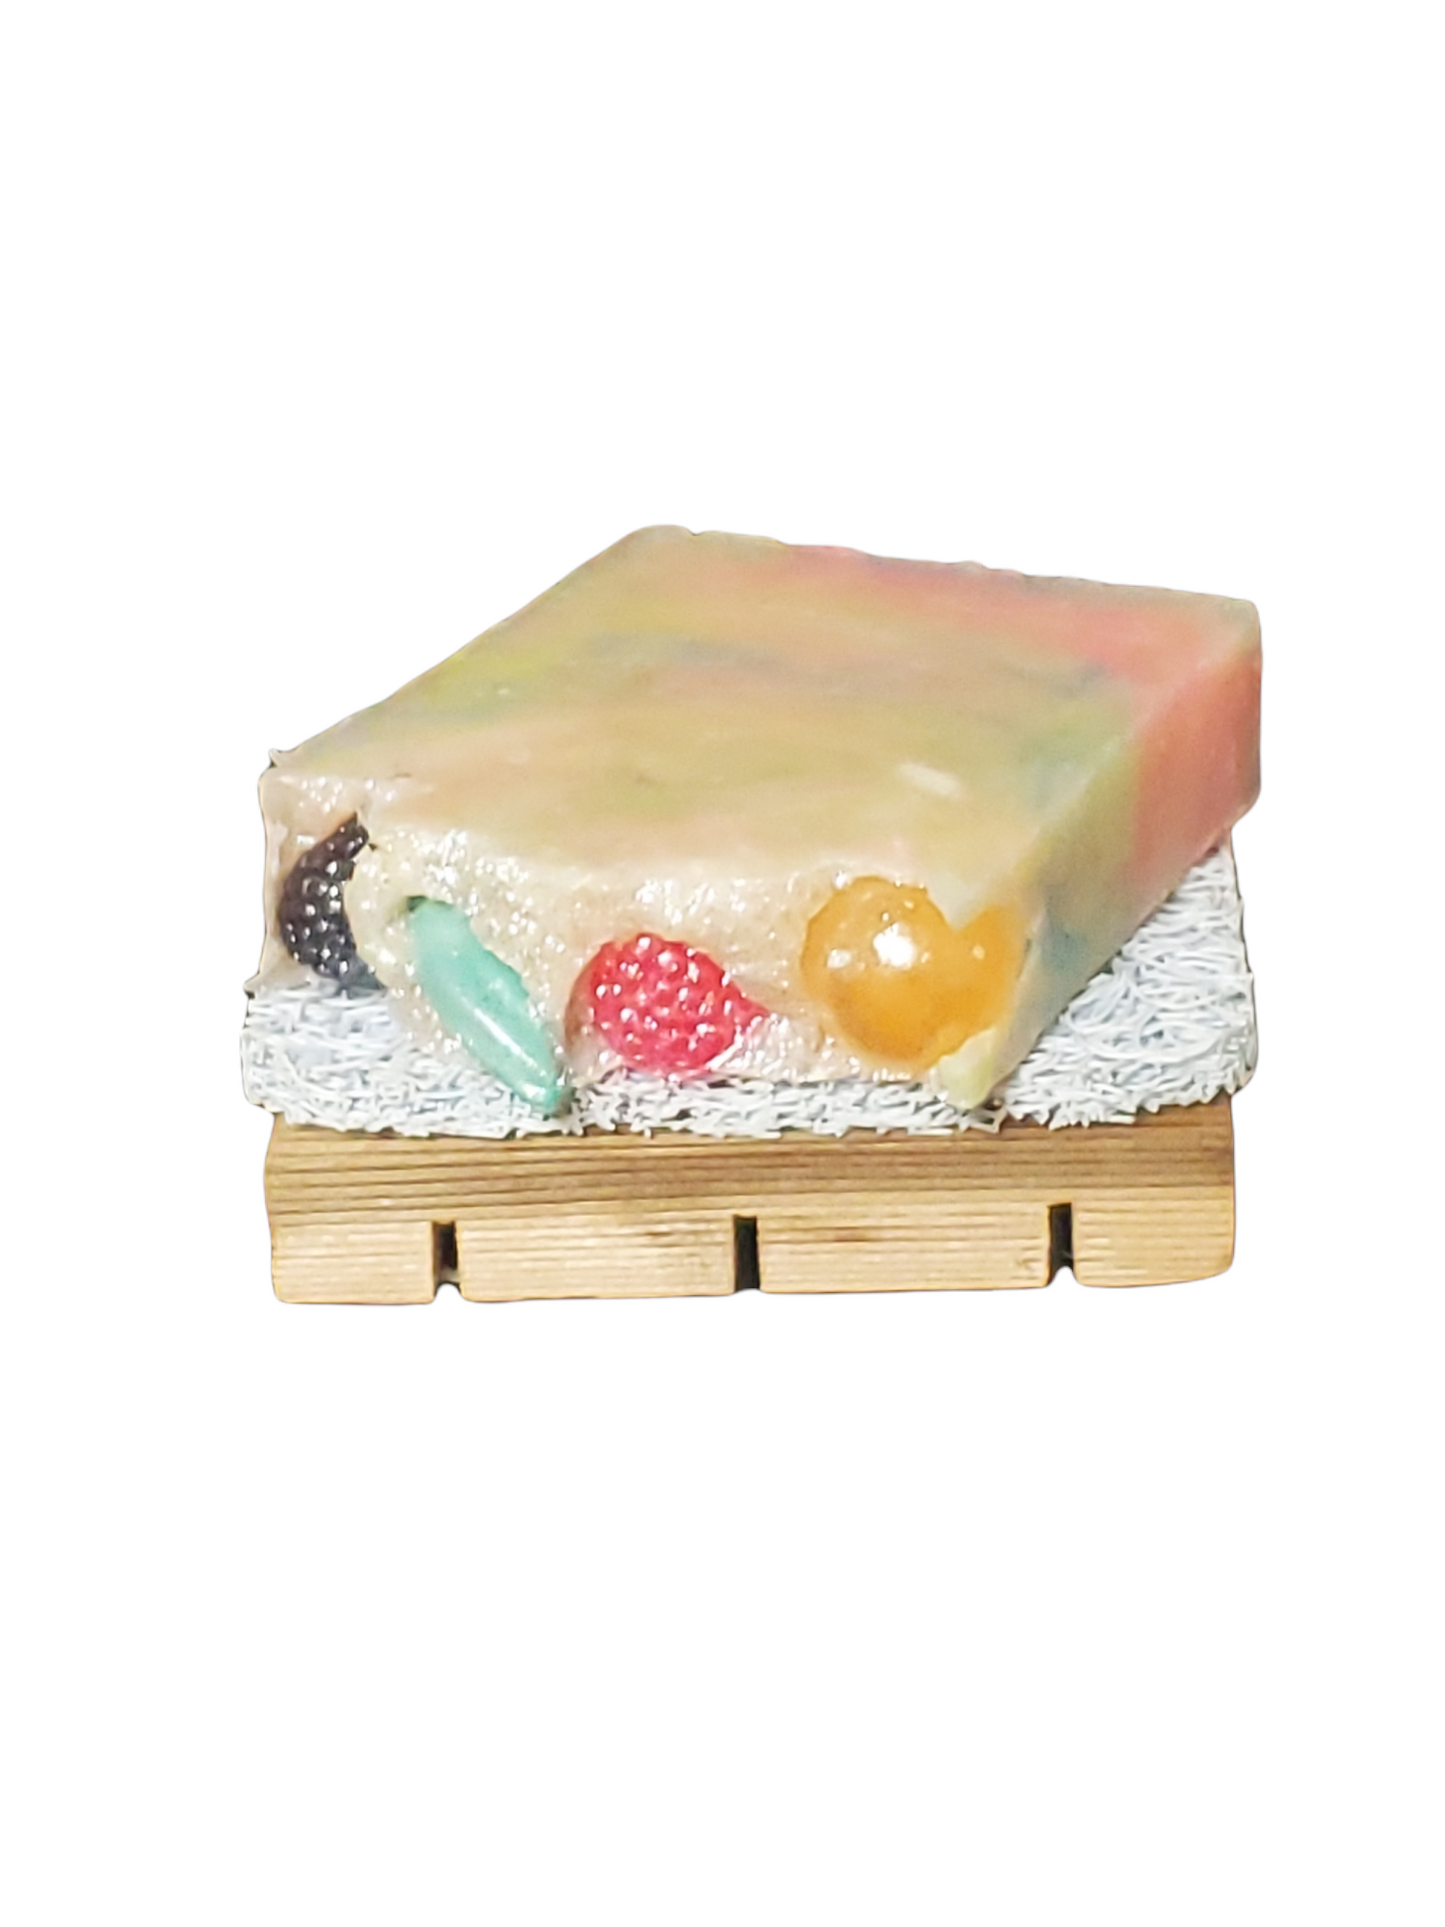 Fruit Slices - Stacy's Soap Suds